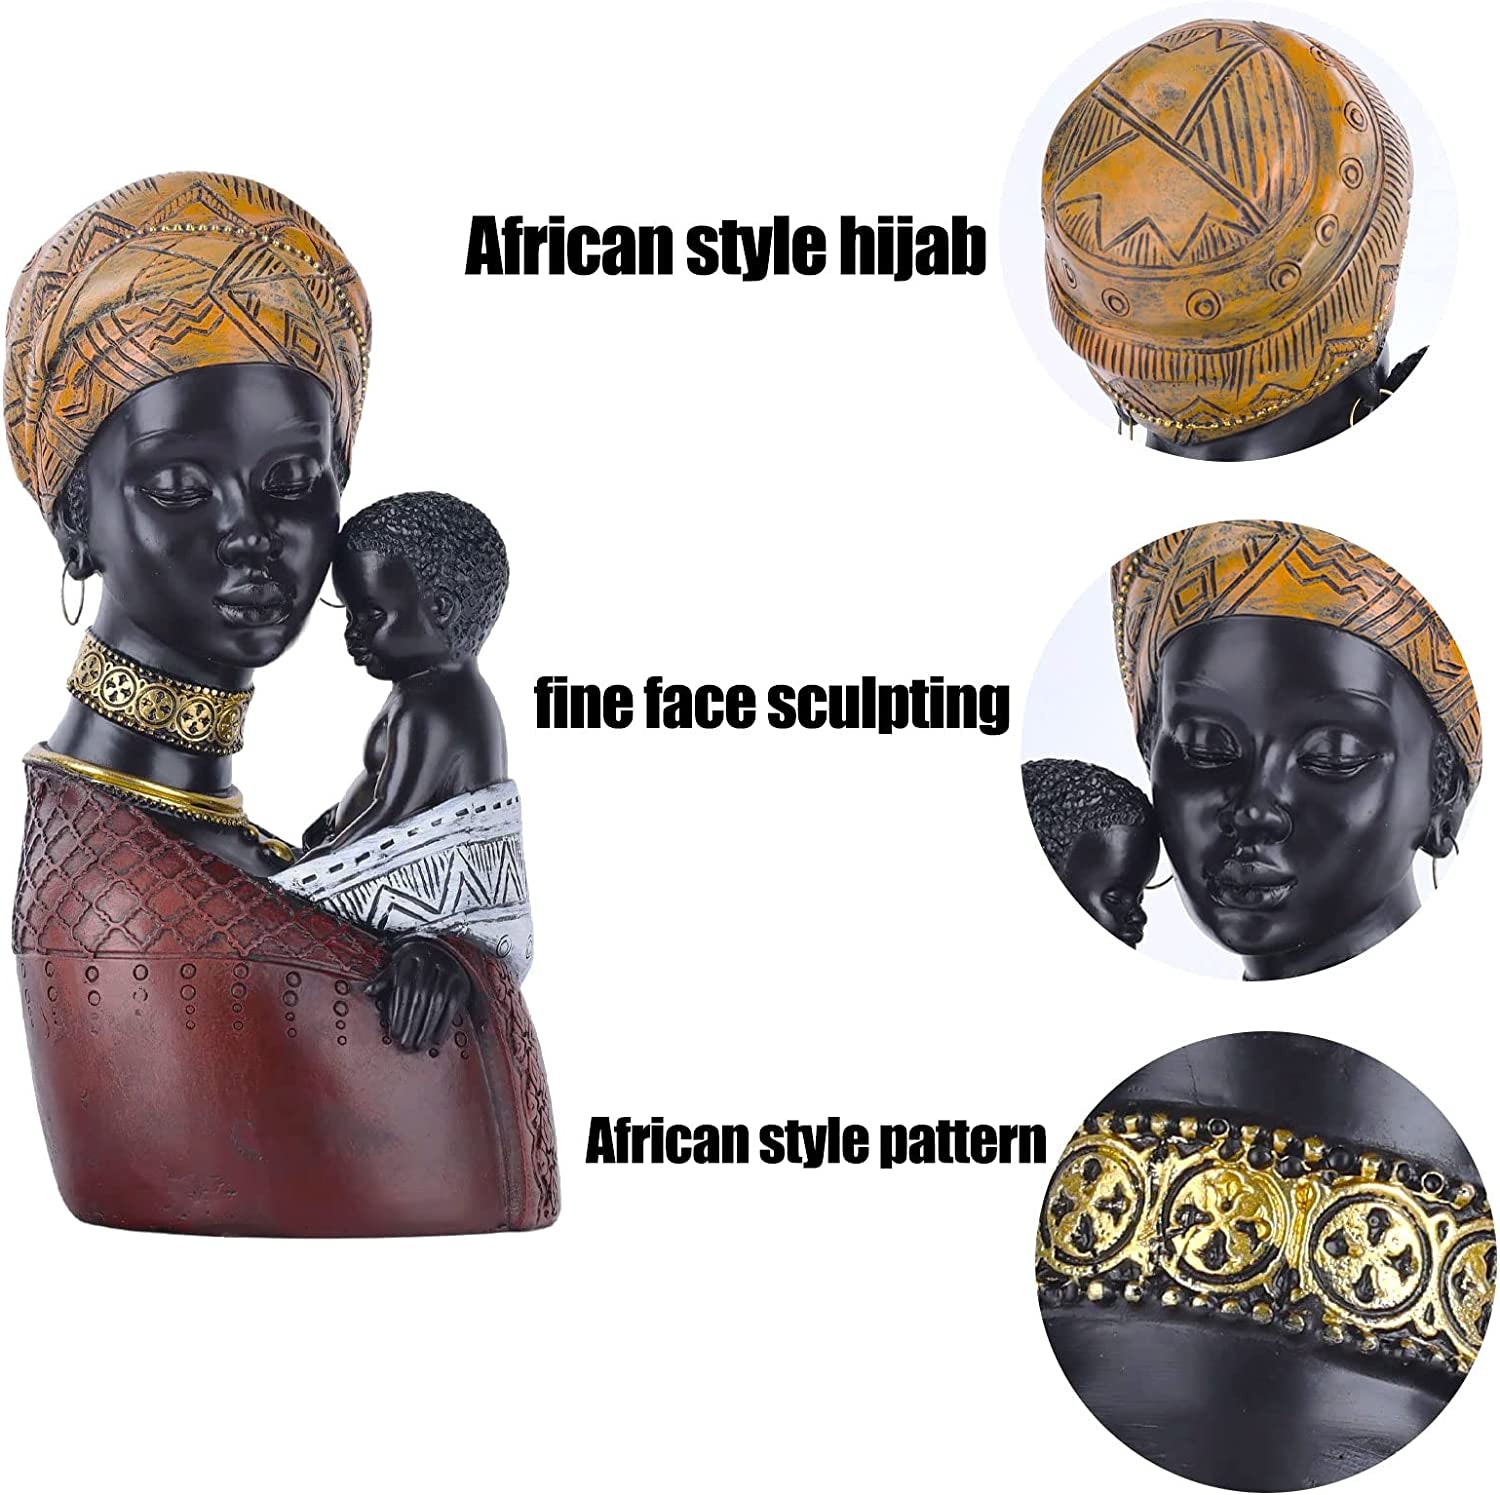 African Women Bust African Art Sculptures, African American Woman and Son Statue, Black Statues African Woman Bust Statue, Suitable for Living Room Desktop Room Bookcase Entrance Decor